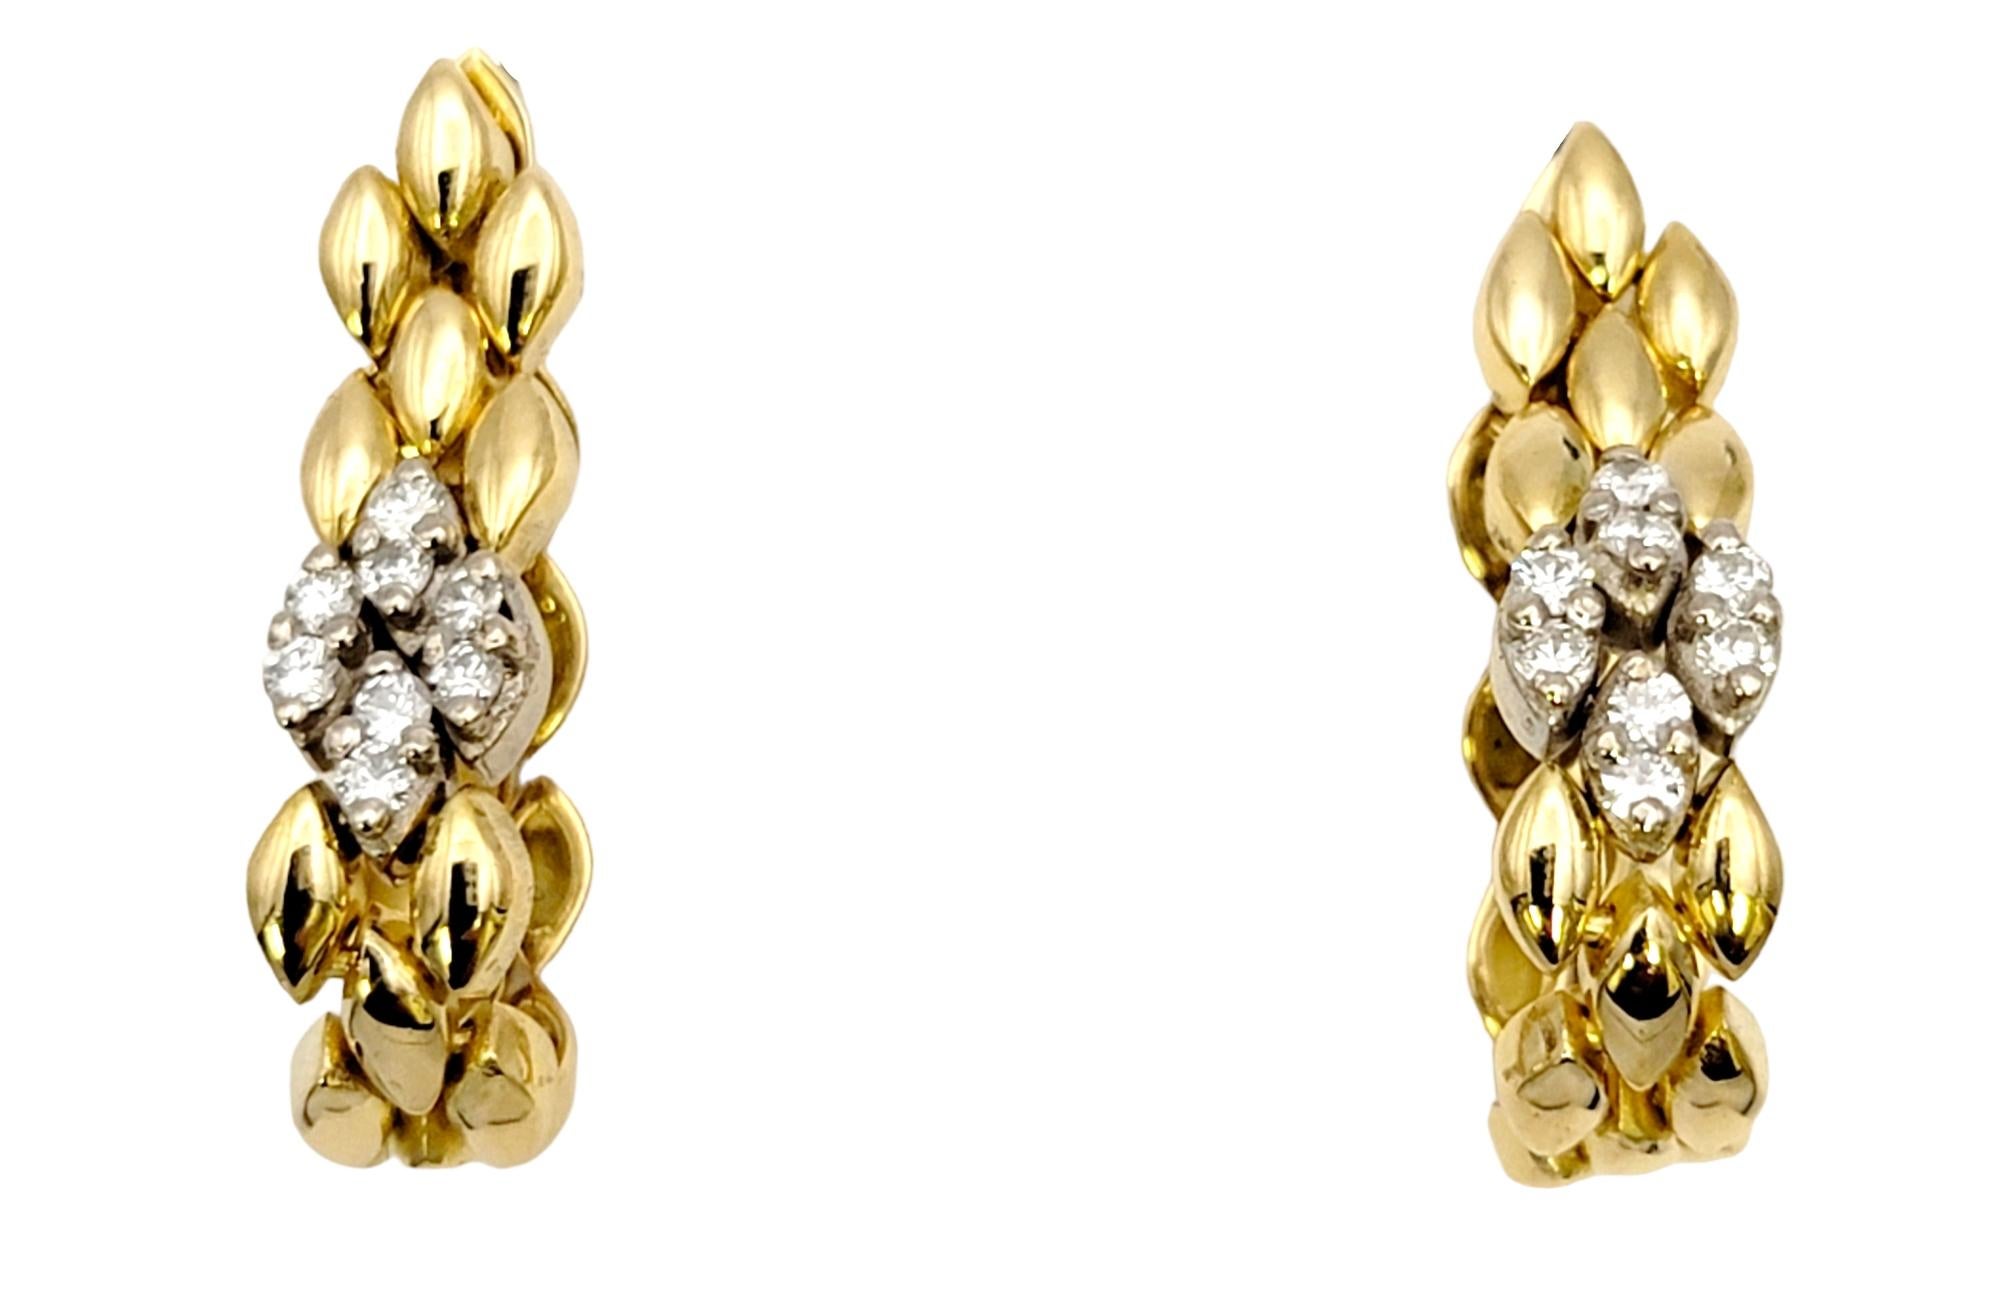 We absolutely love the versatility of these incredible gold and diamond earrings! The unique dual design allows for wear as either an elegant drop, or a small hoop, making these the perfect addition to your jewelry wardrobe. 

These beautiful